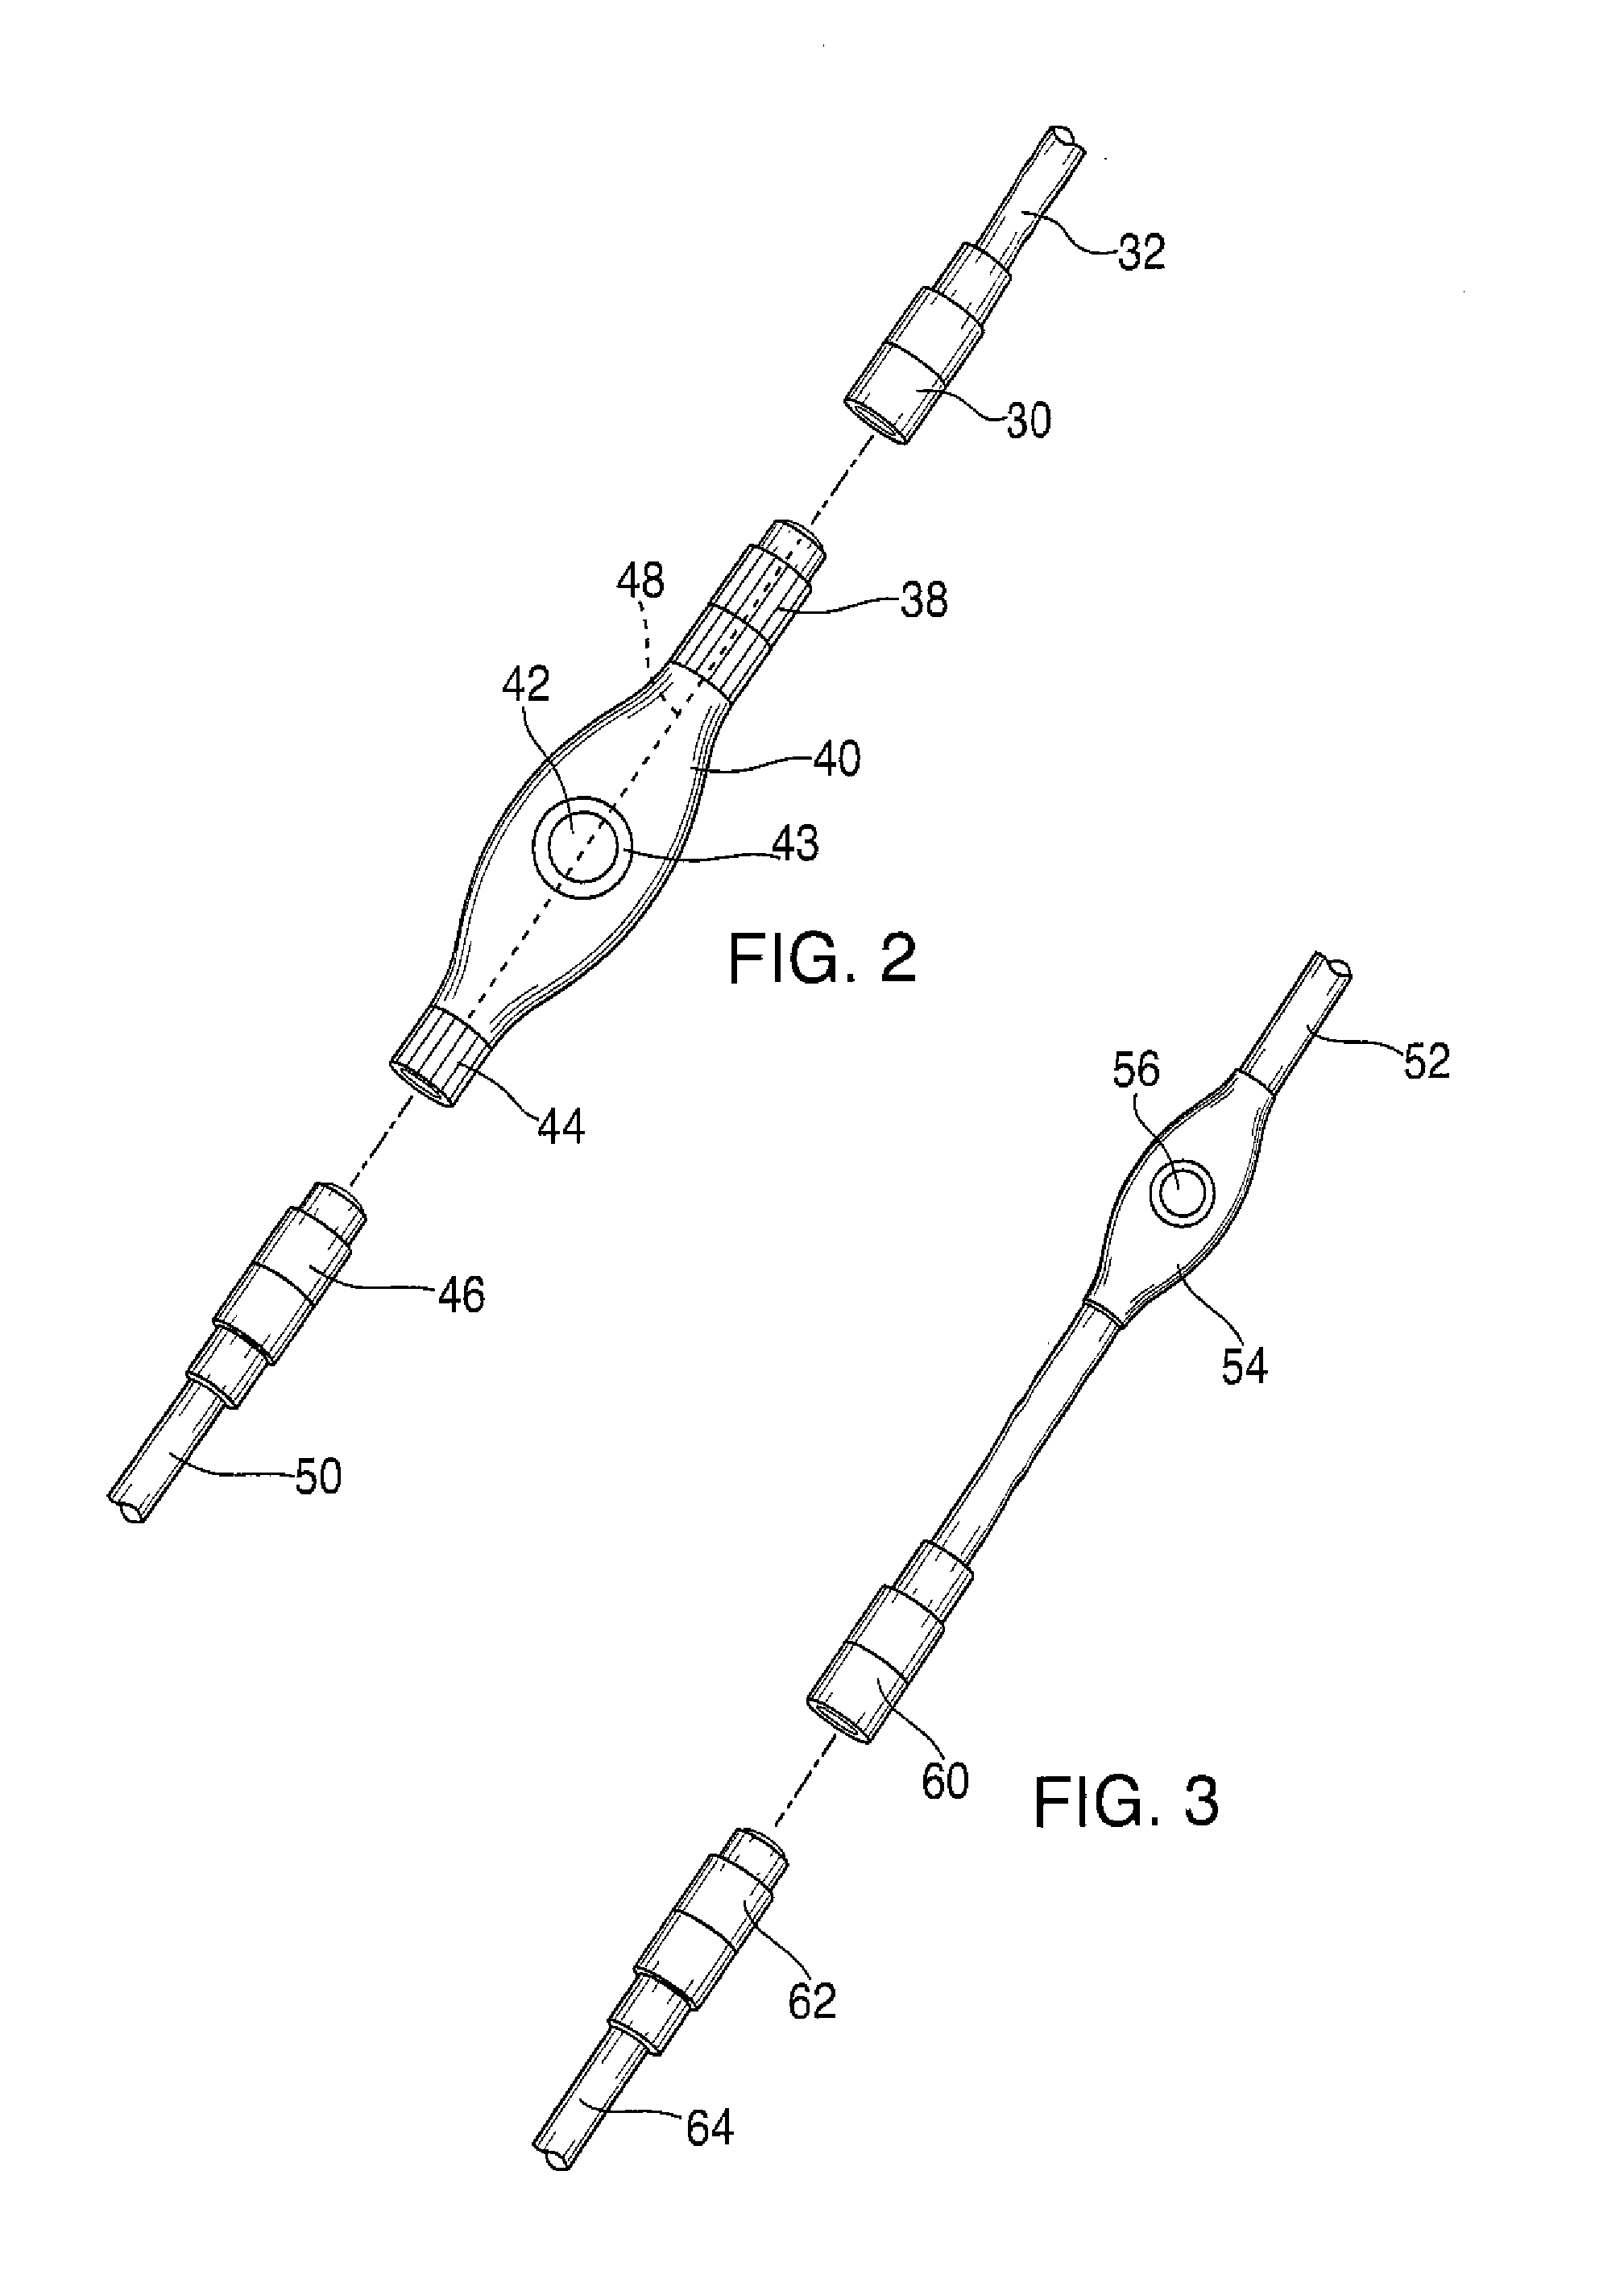 Ablation catheter system for preventing damage